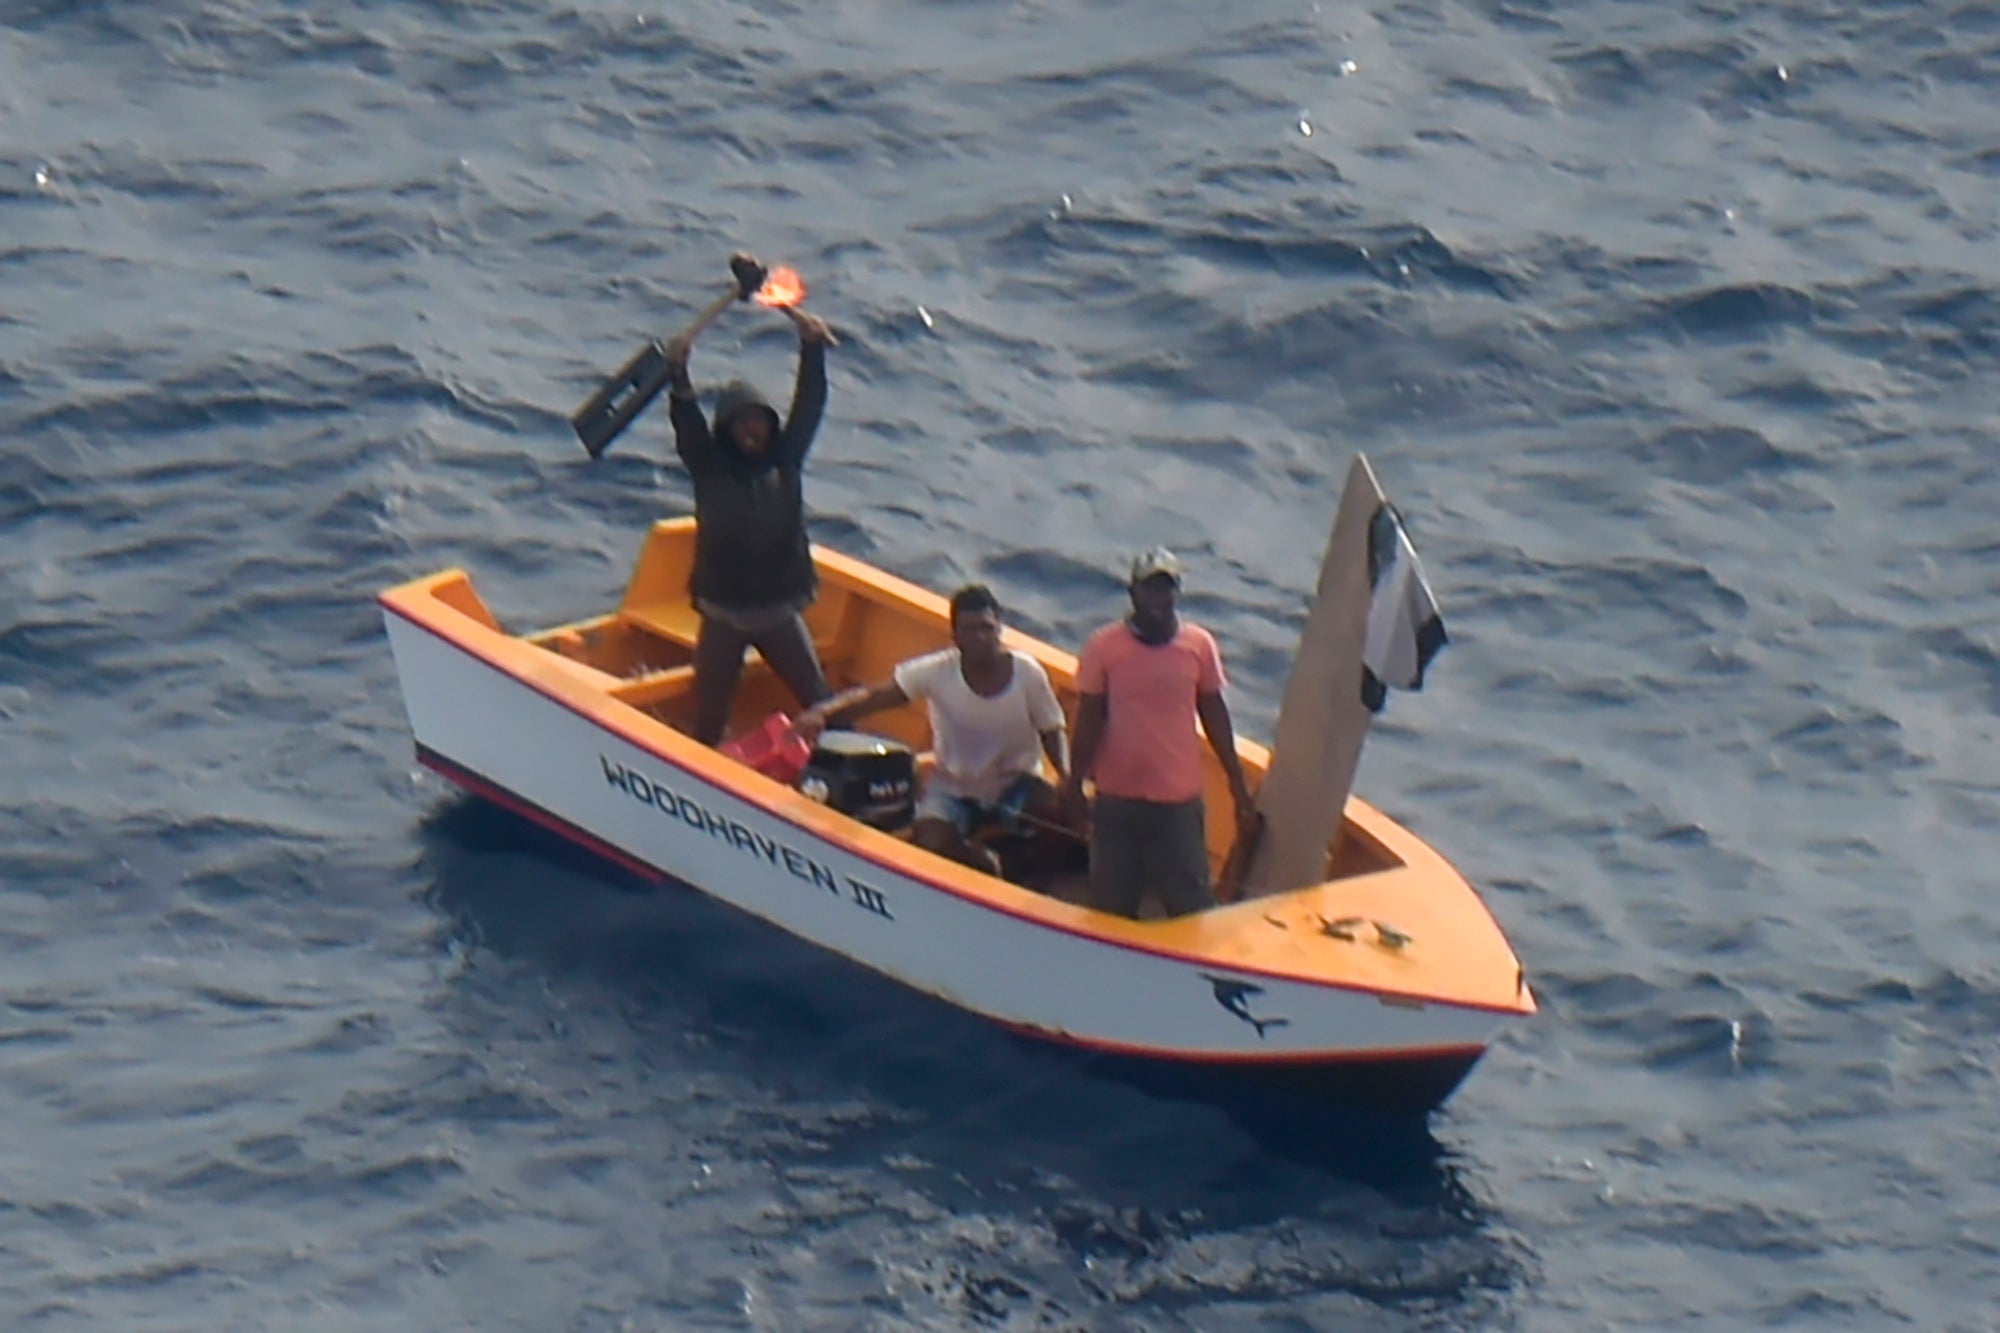 Crew members of one of the rescued boats wave to Royal New Zealand Air Force plane near Makin Island in Kiribati